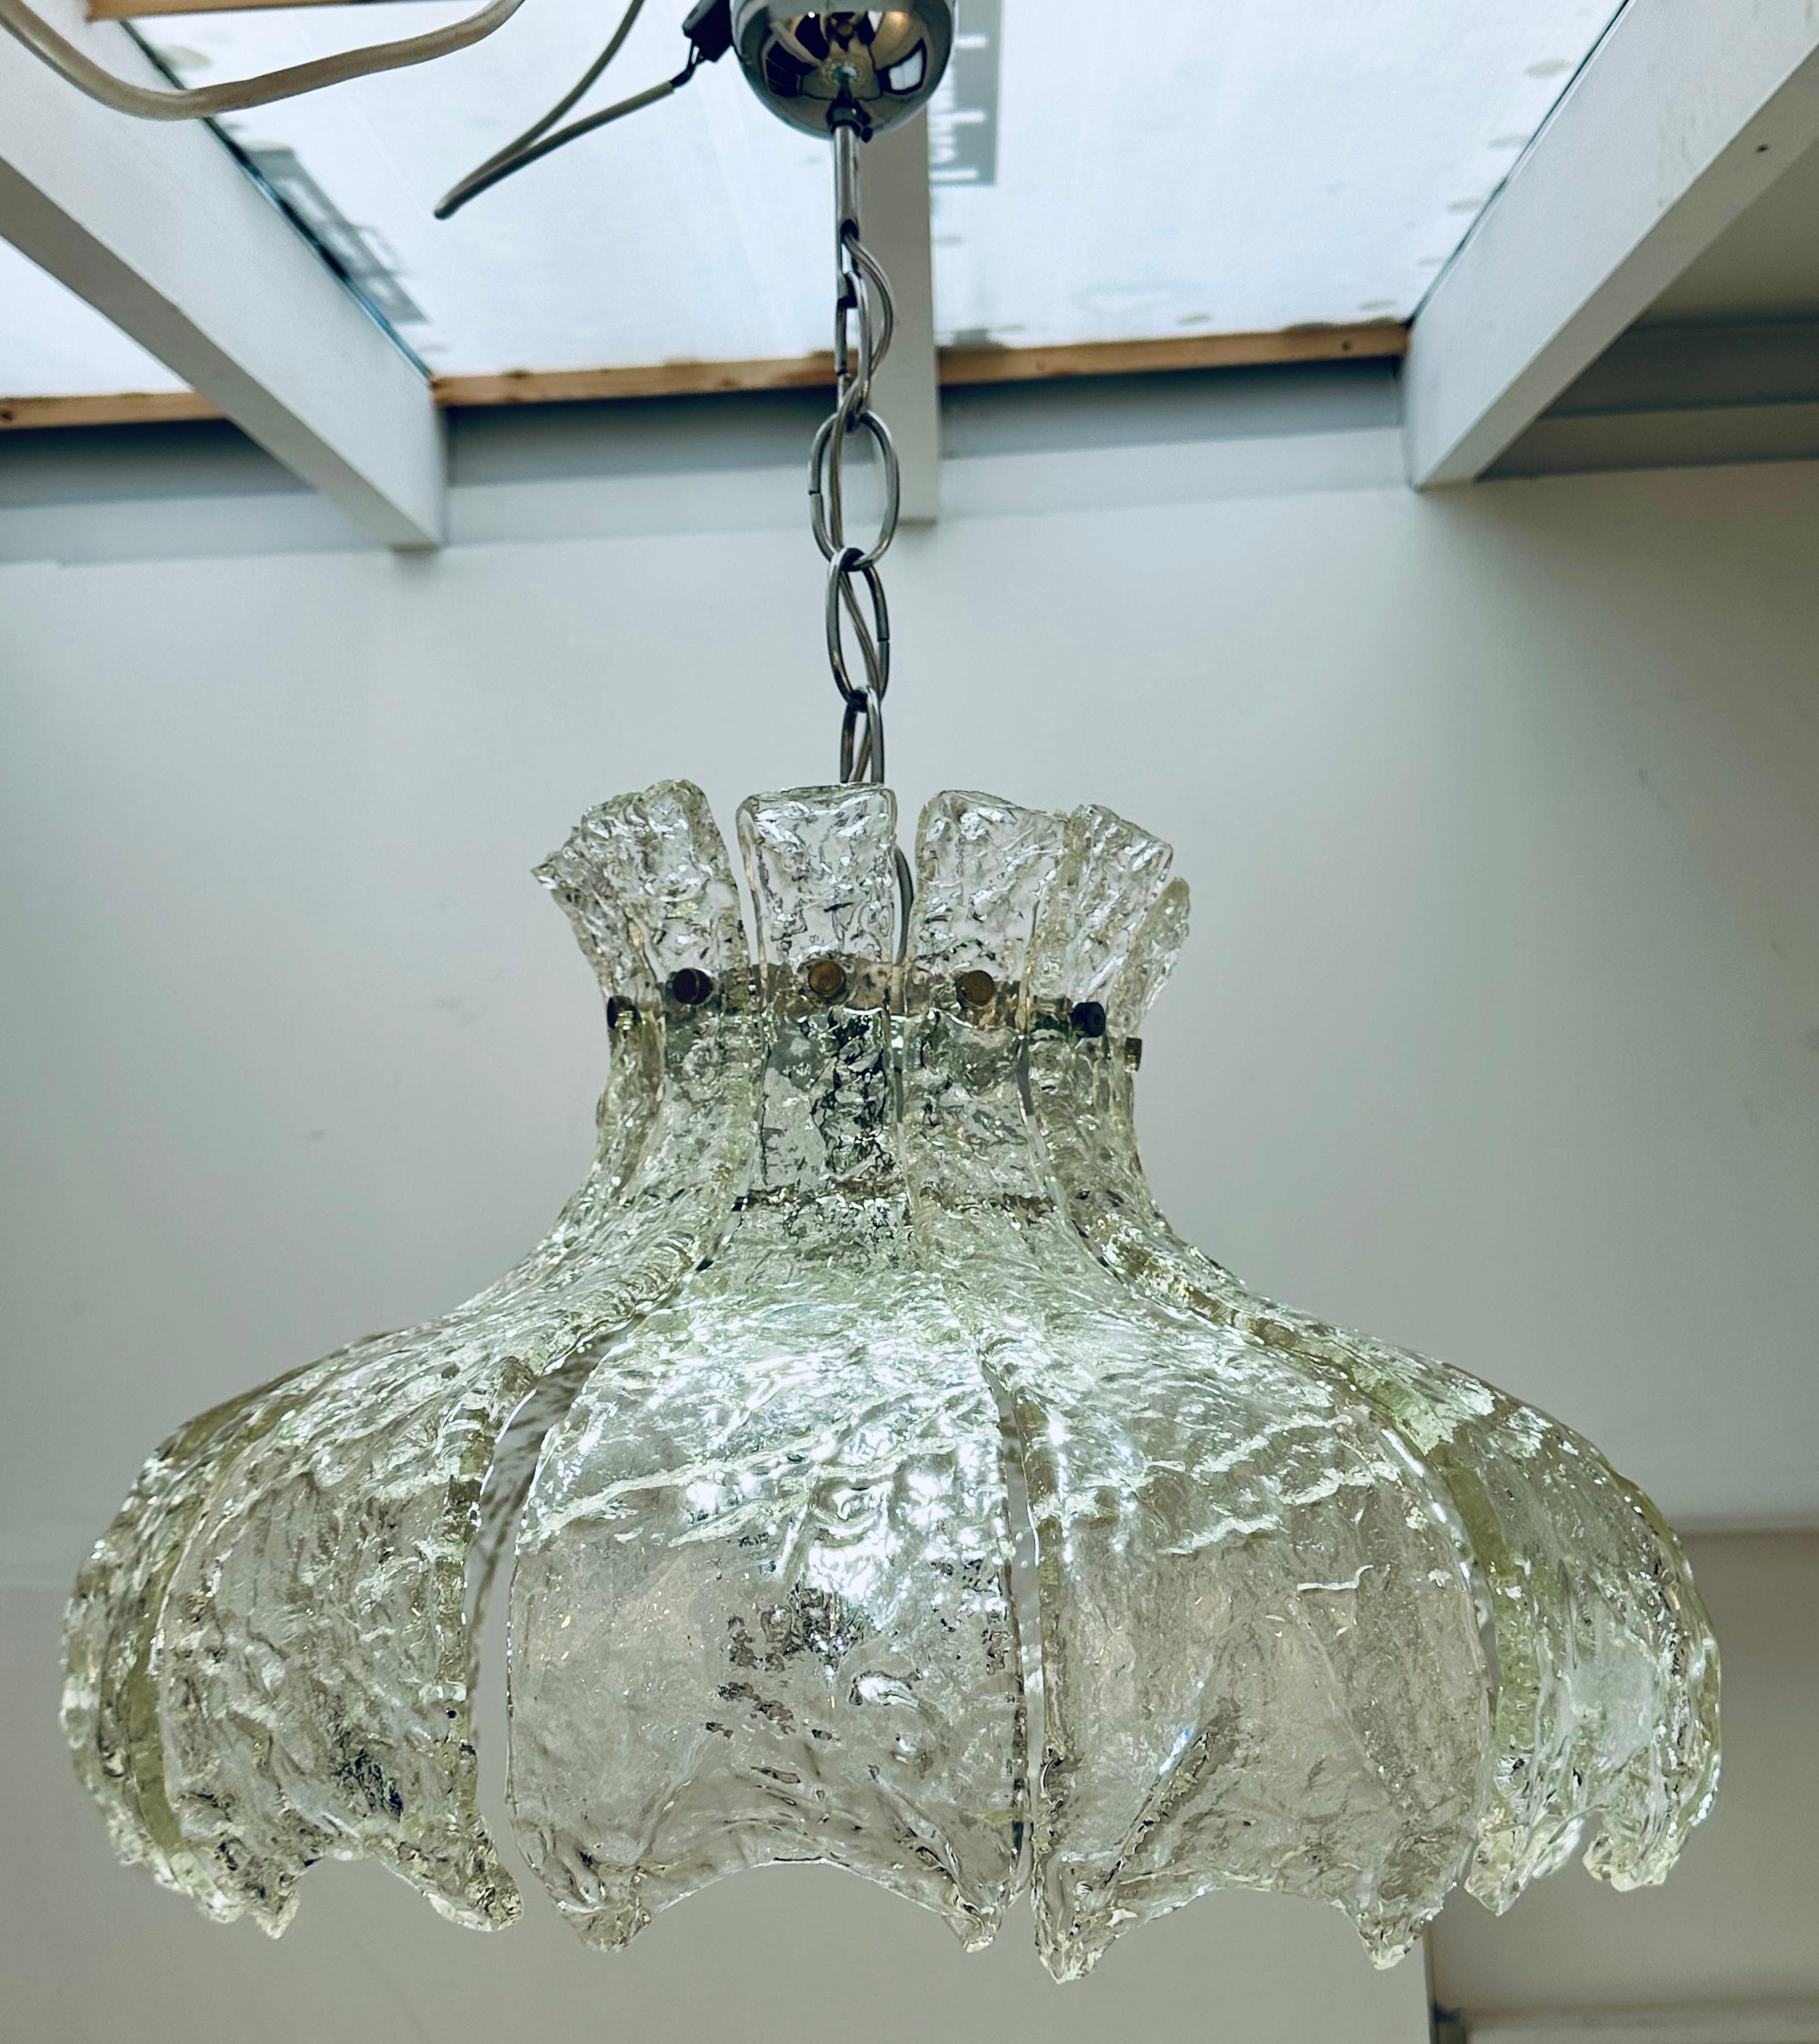 1960s Mid century Italian Murano glass pendant light with 12 individual curved textured thick clear-glass forked petals which are secured with a small chrome flat-head screw onto a chromed-metal frame to form a large hanging tulip flower. As you can